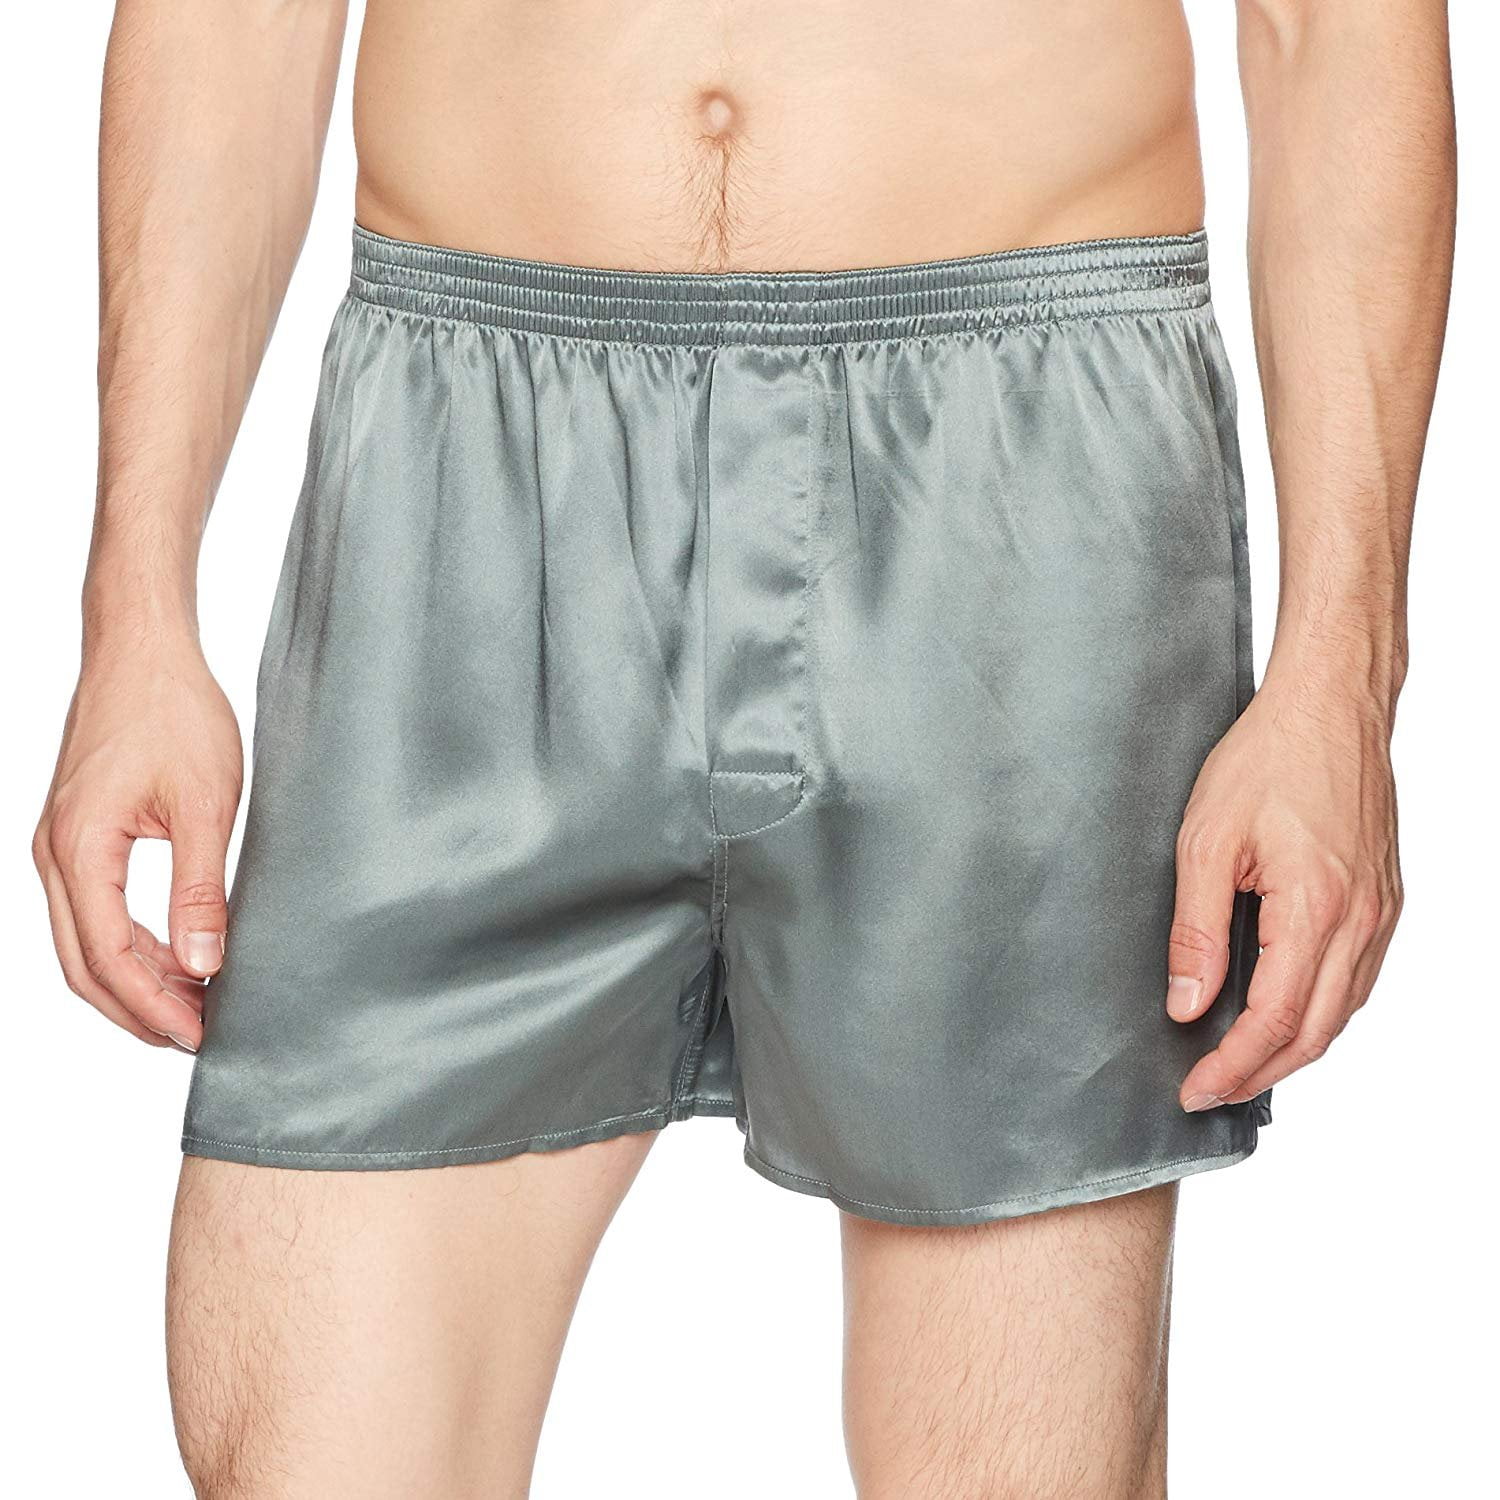 Affordable men's silk boxers by Royal Silk®. Since 1978.